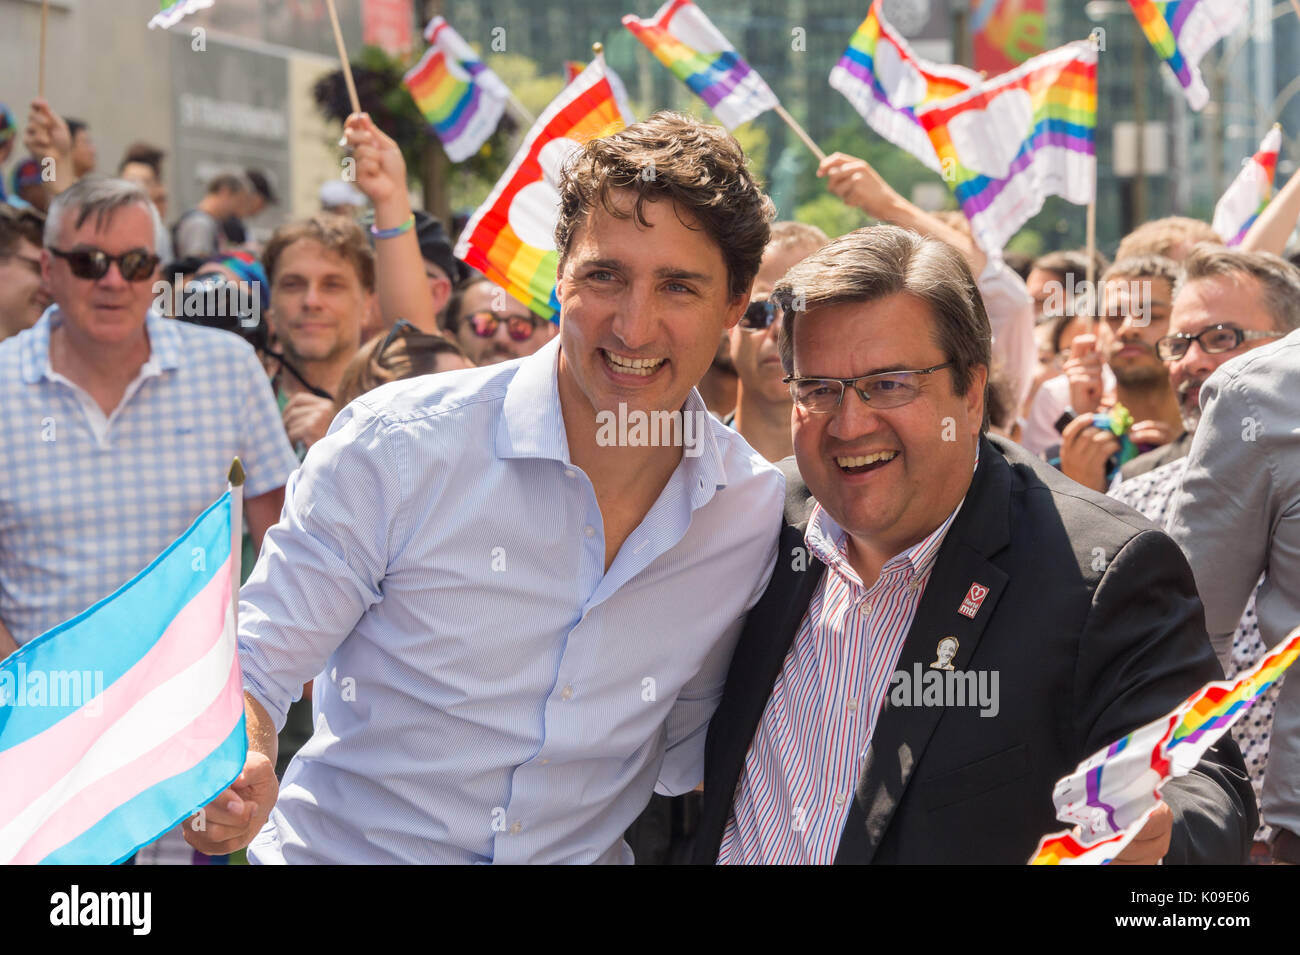 Montreal, CANADA. 20th August, 2017. Canadian Prime Minister Justin Trudeau and Montreal Mayor Denis Coderre take part in Montreal Pride Parade. Stock Photo